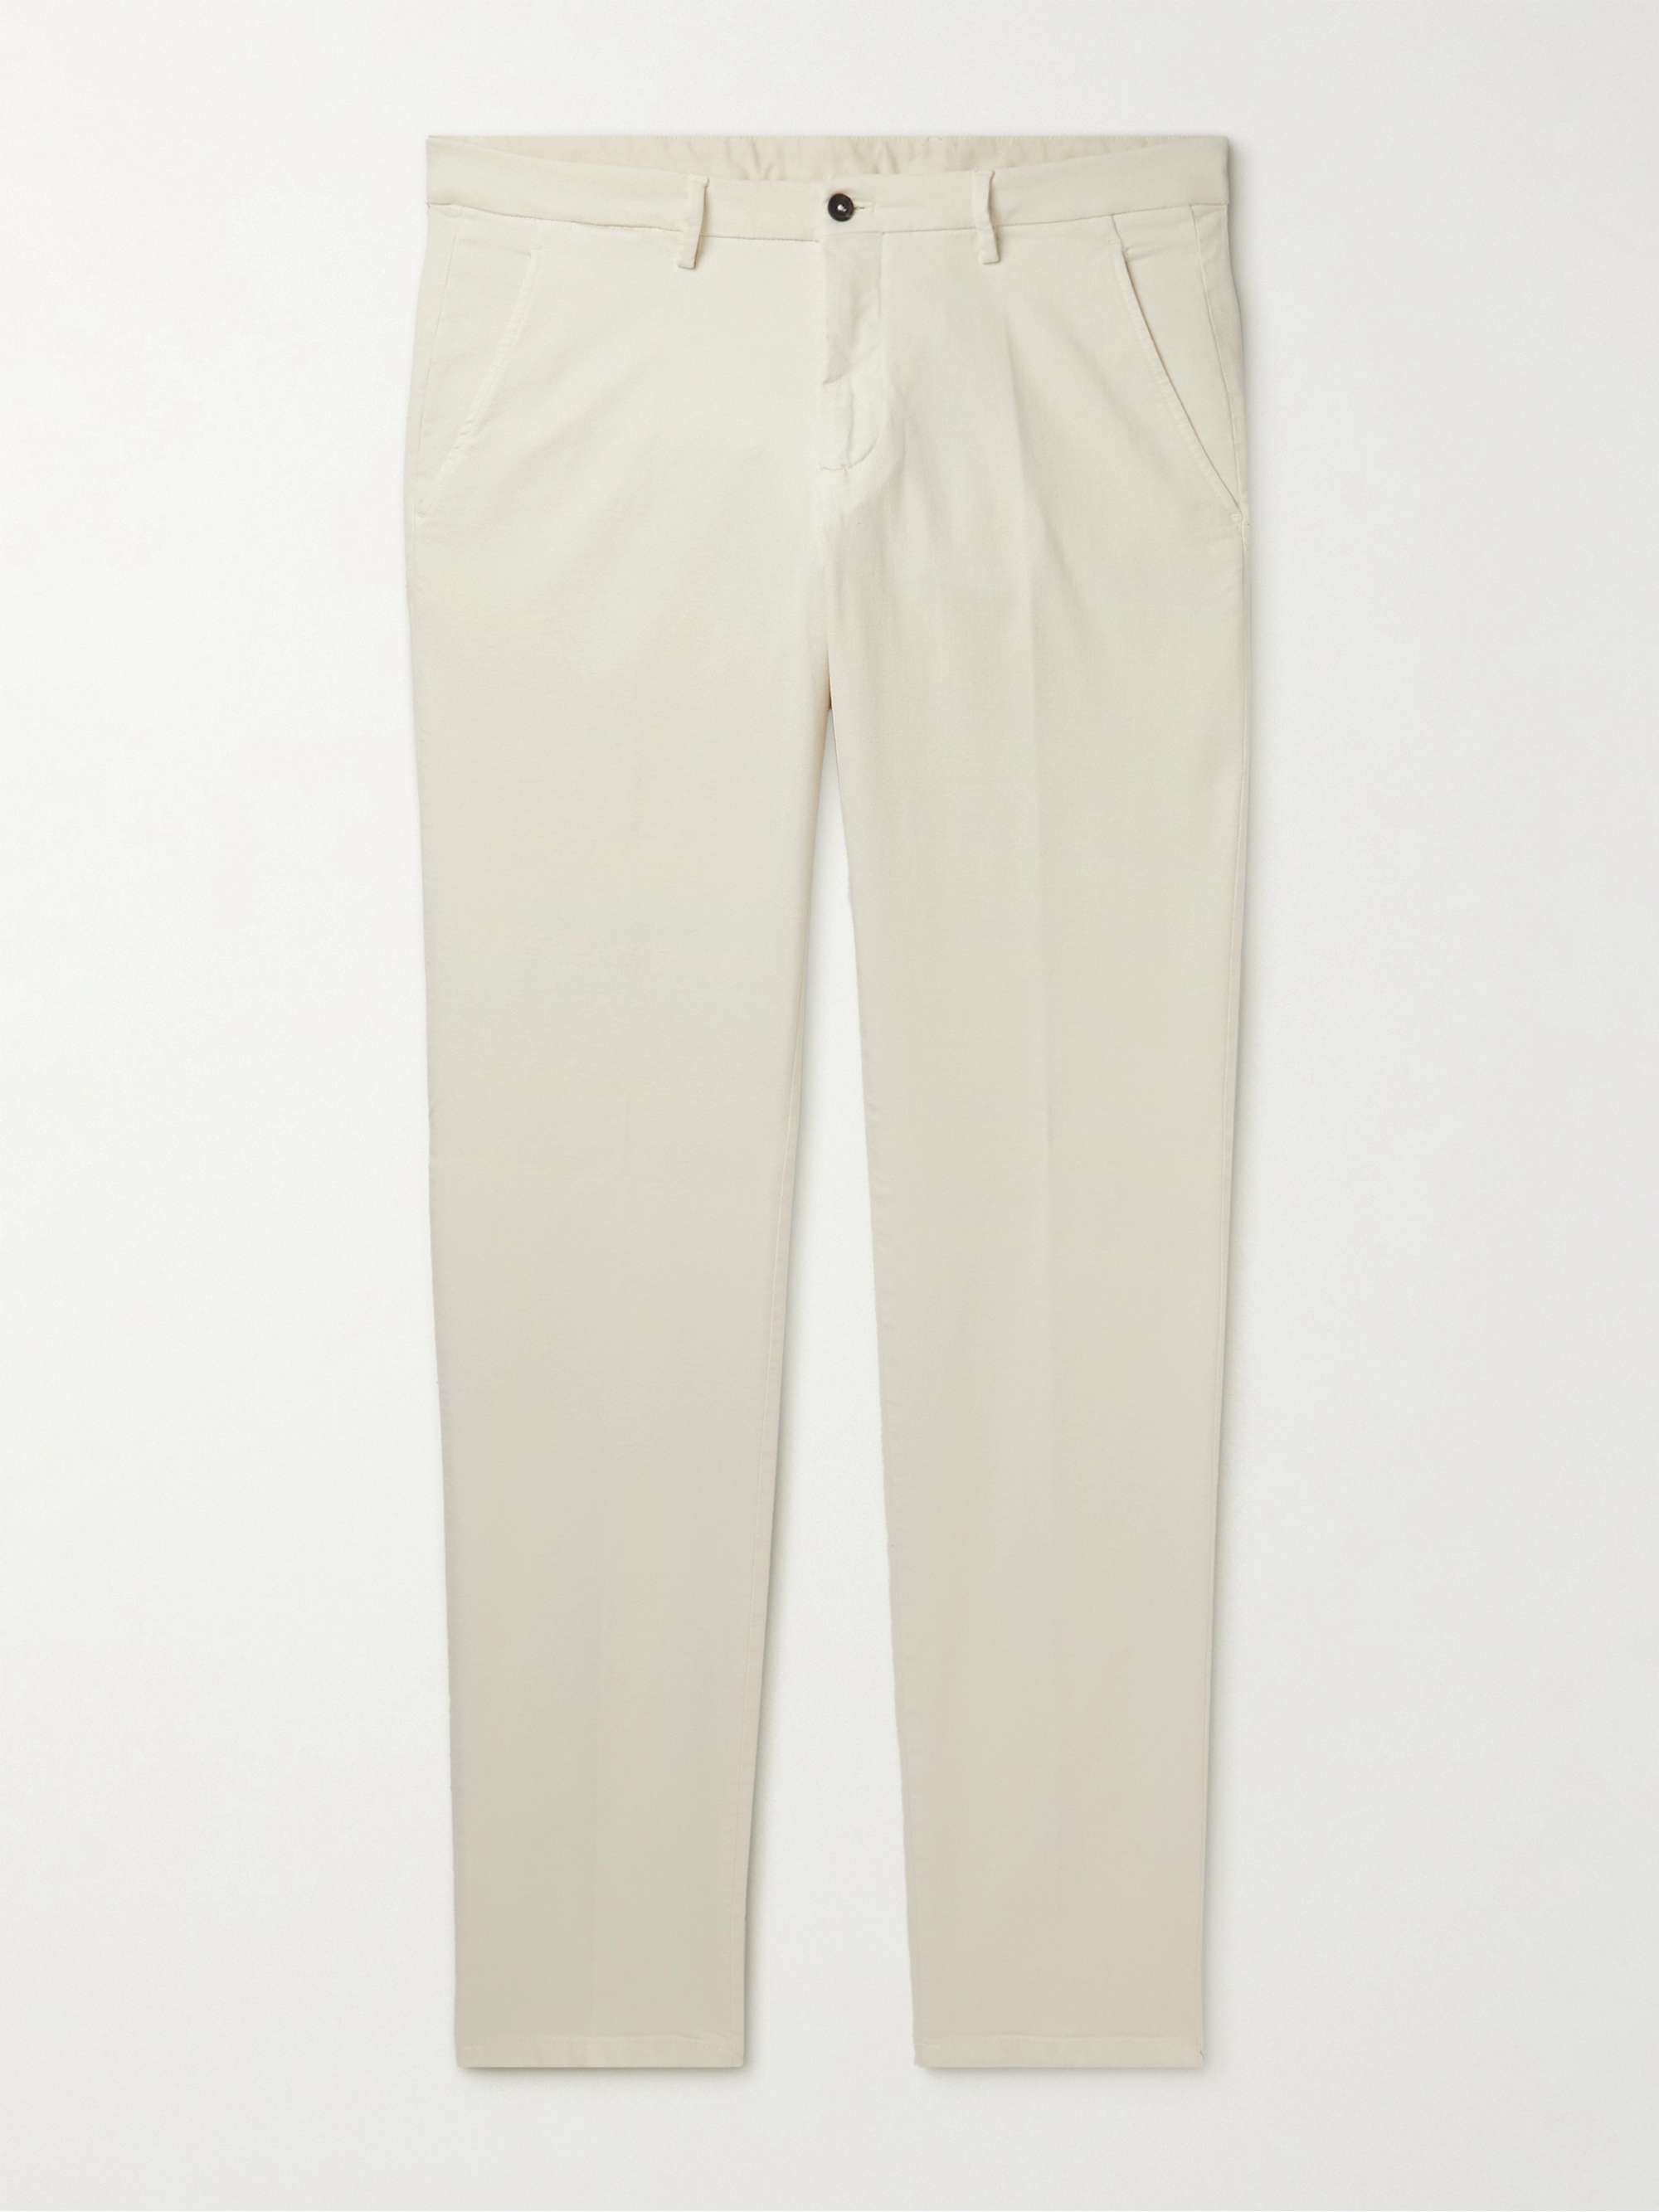 THOM SWEENEY Slim-Fit Cotton-Blend Twill Chinos for Men | MR PORTER